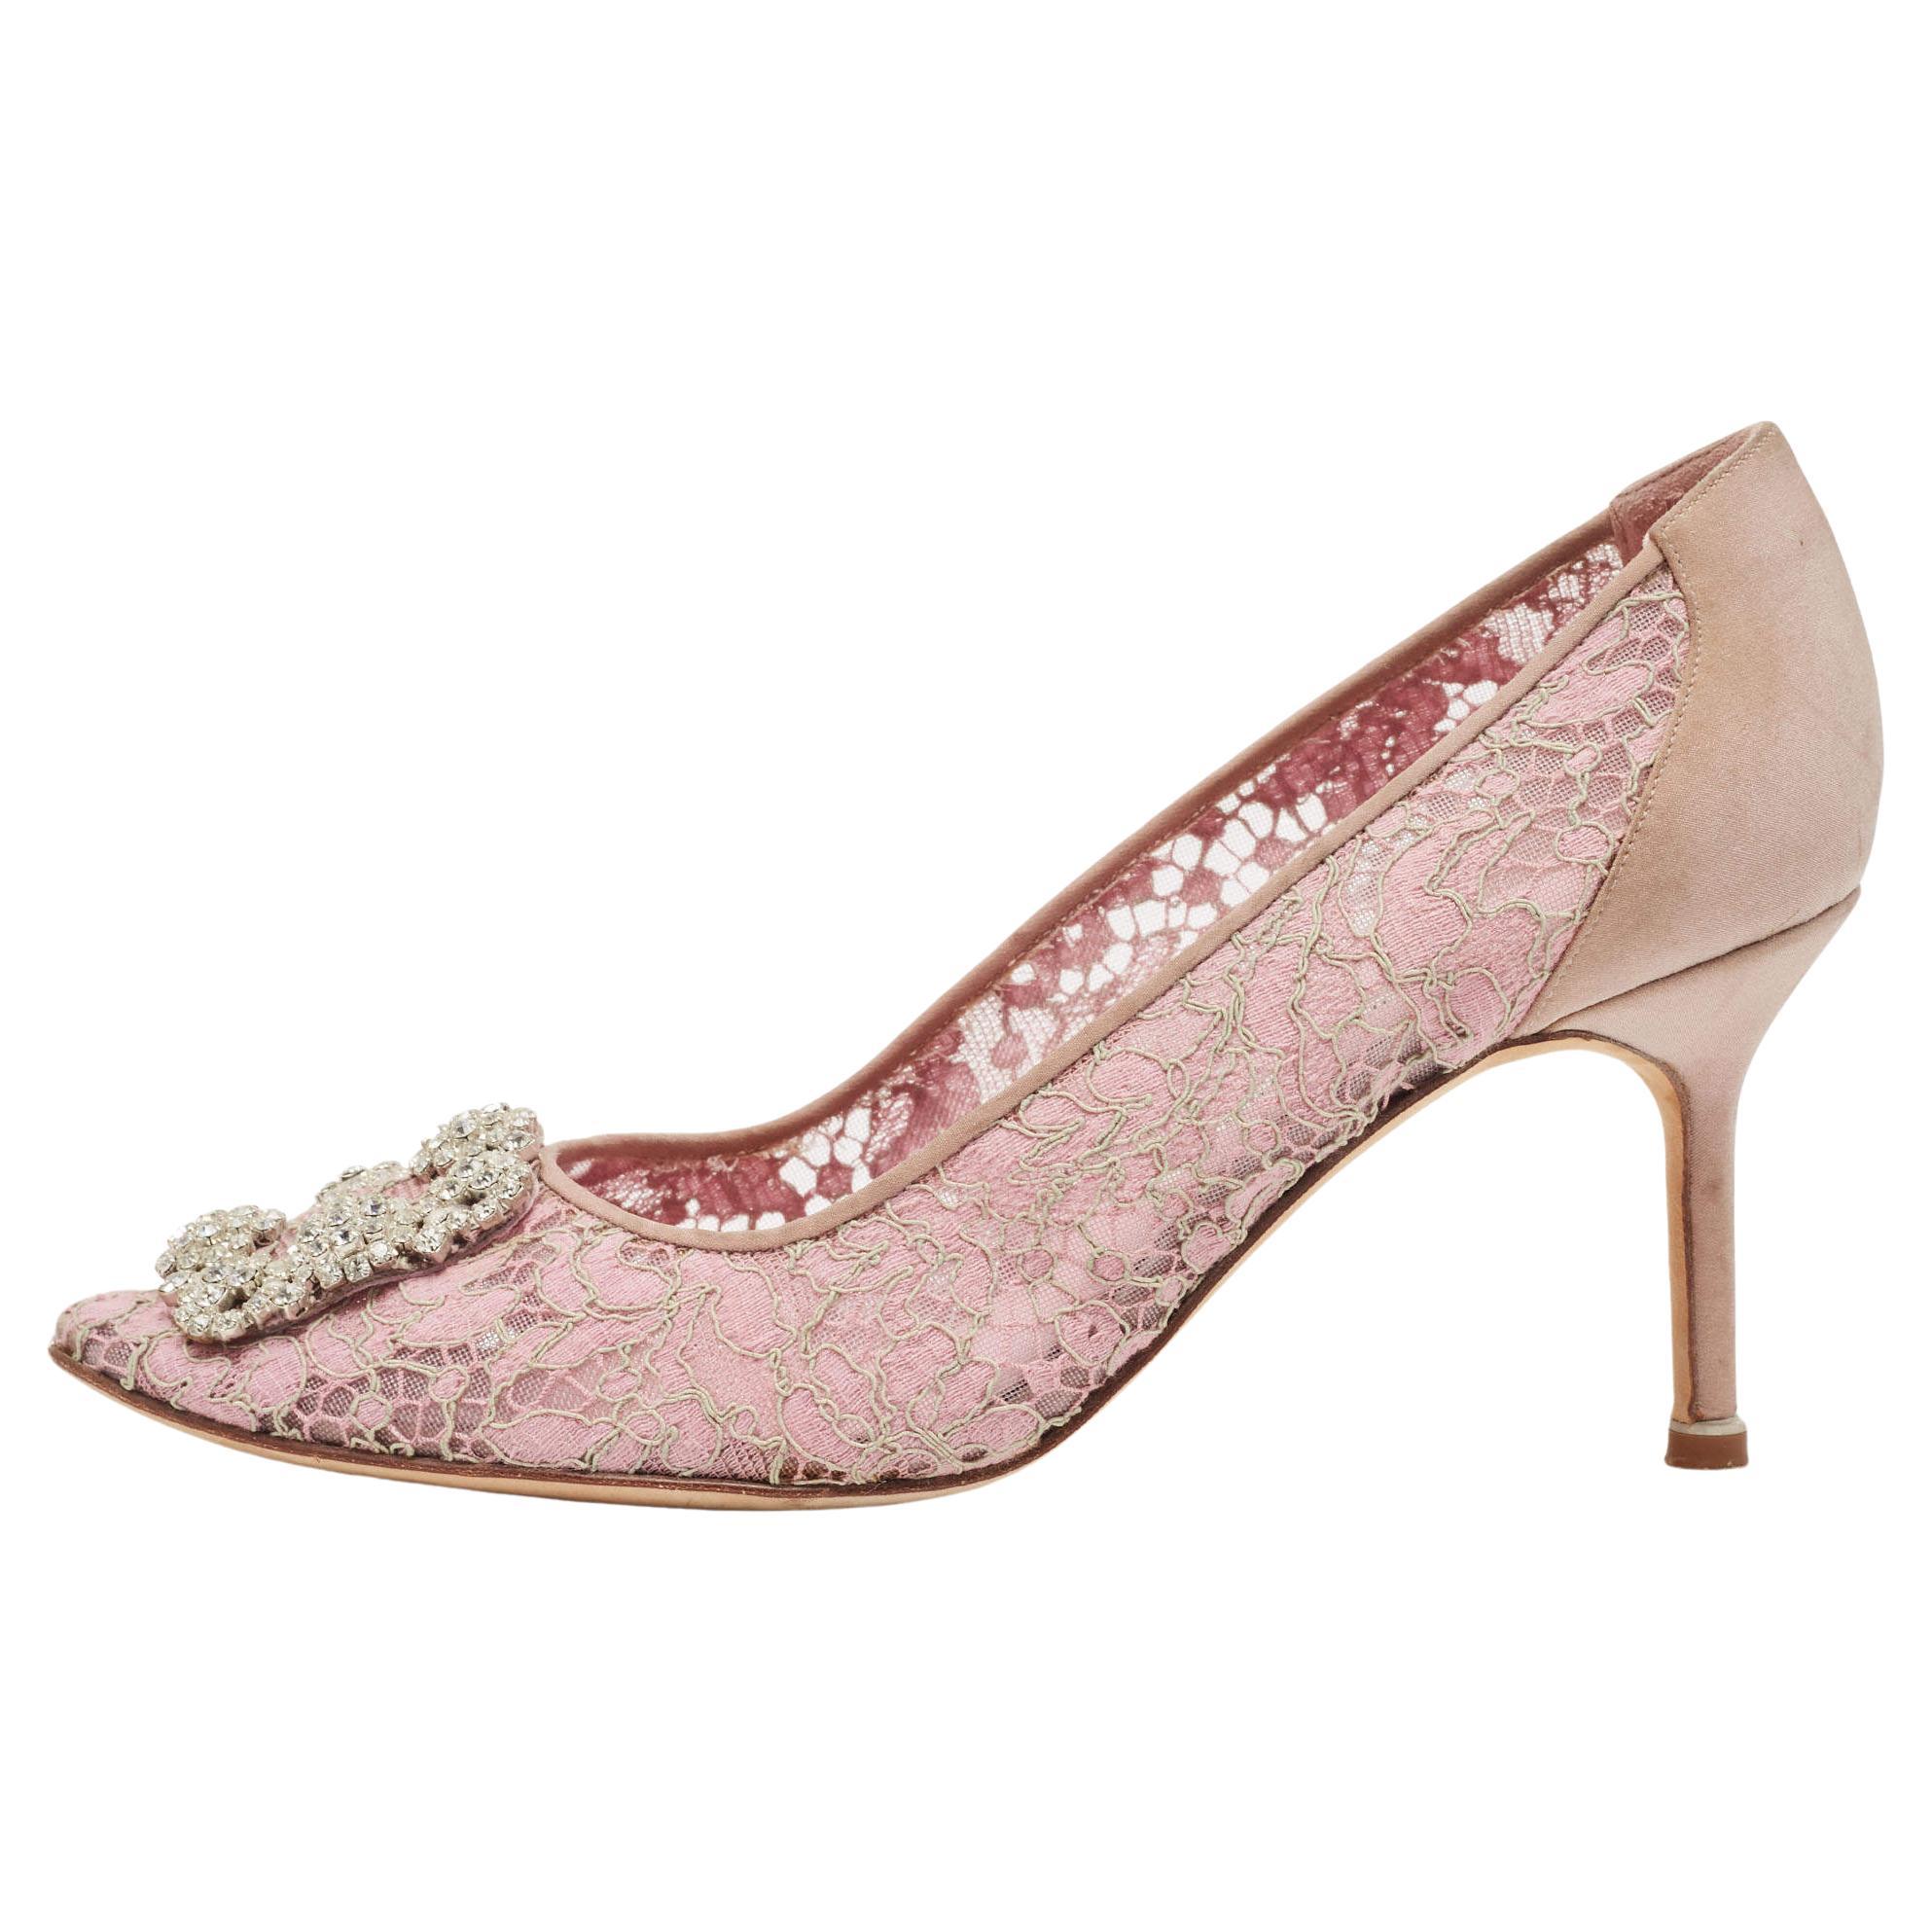 Manolo Blahnik Pink Lace and Mesh Hangisi Pumps Size 38.5 For Sale